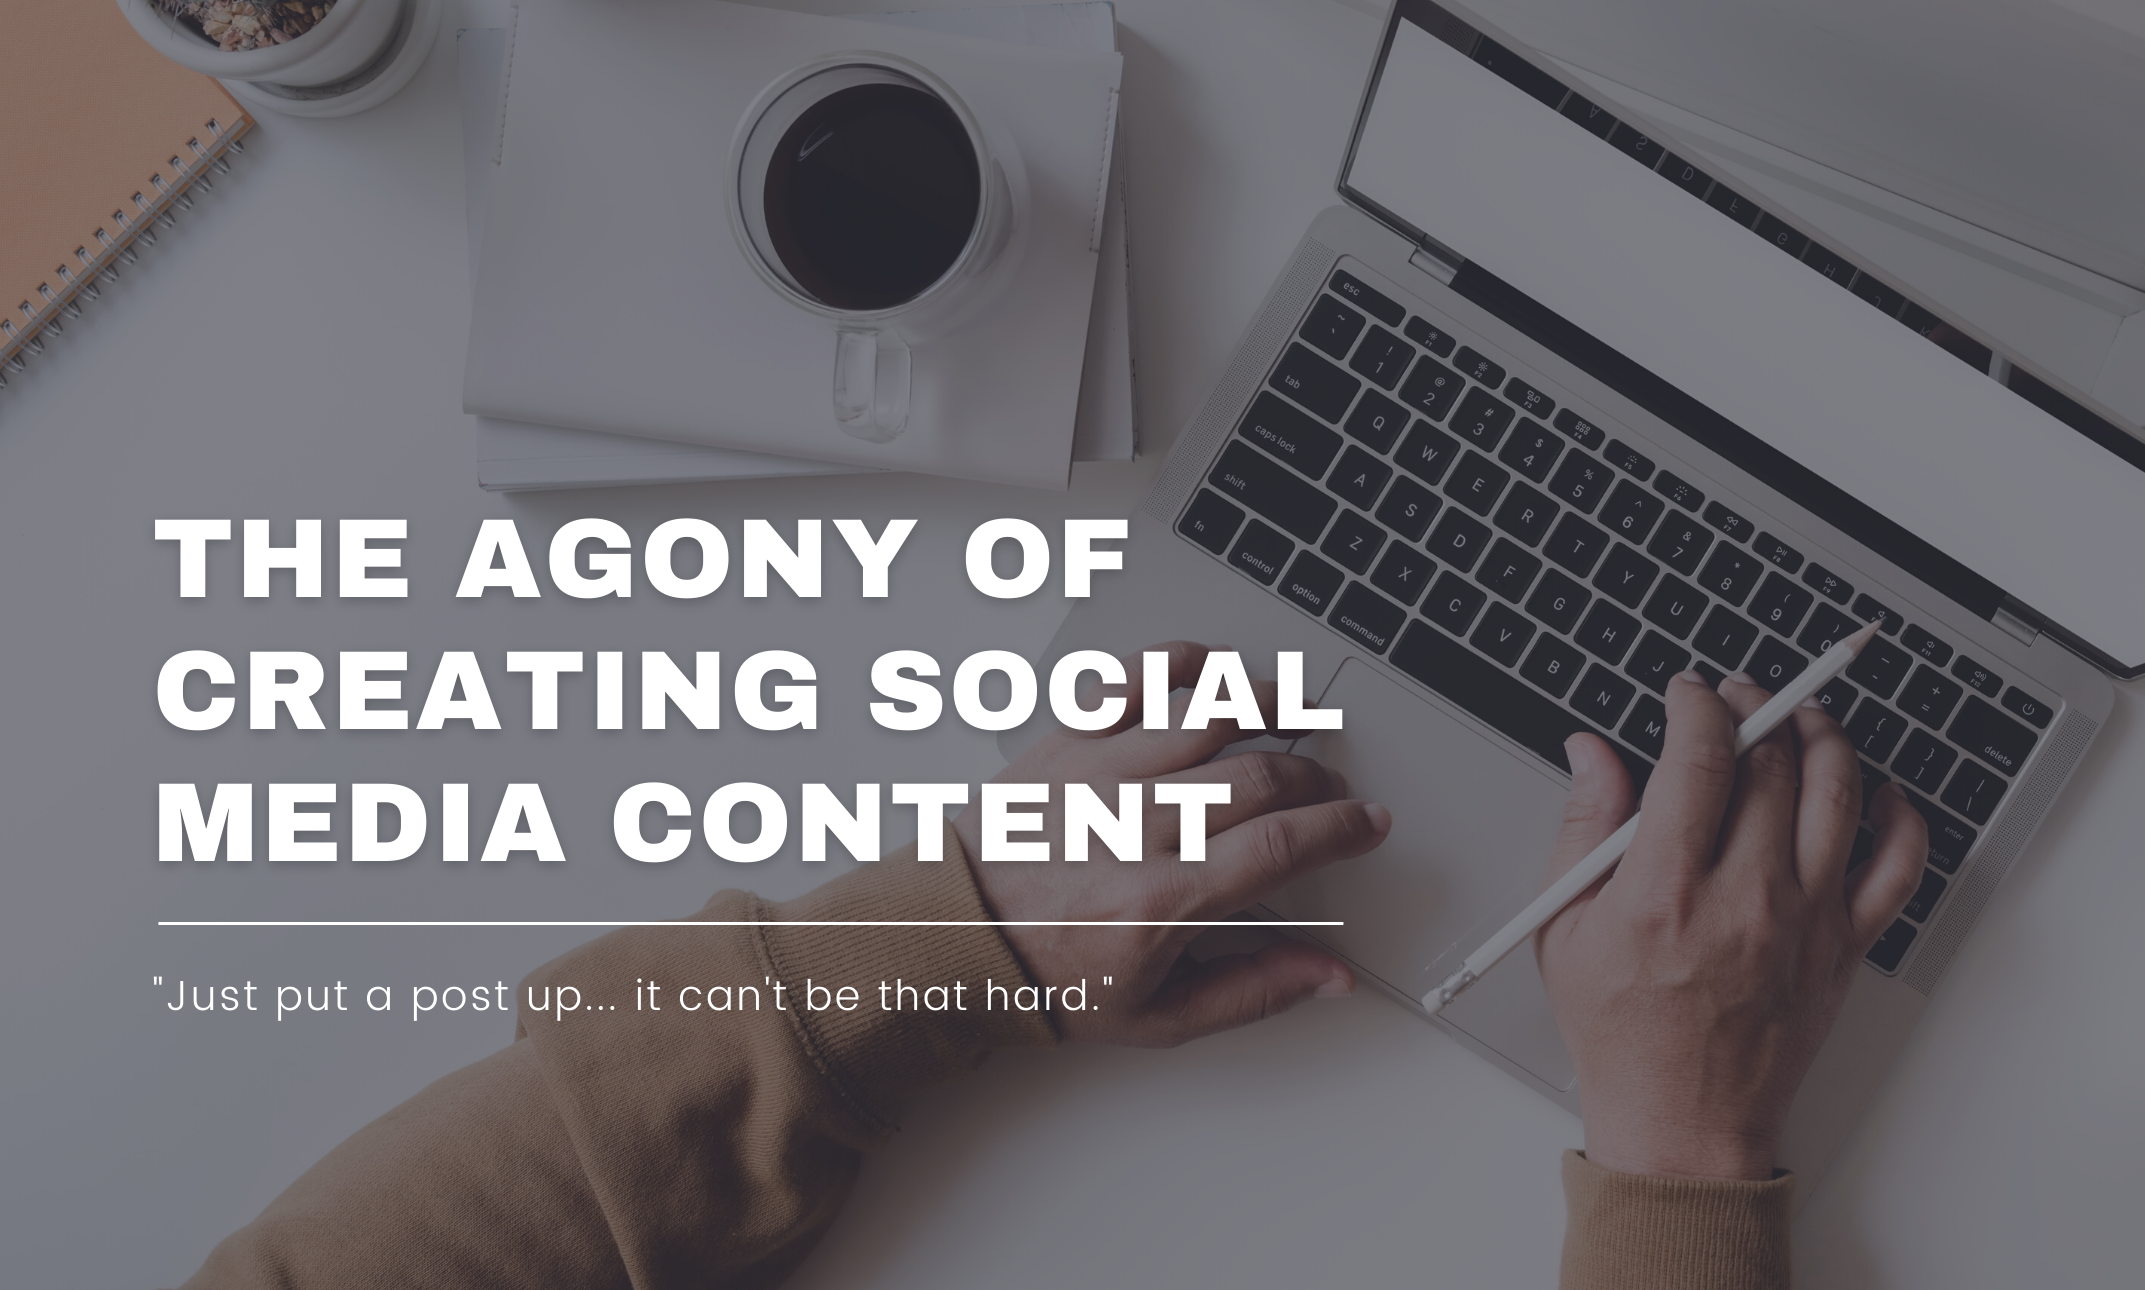 The agony of creating social content